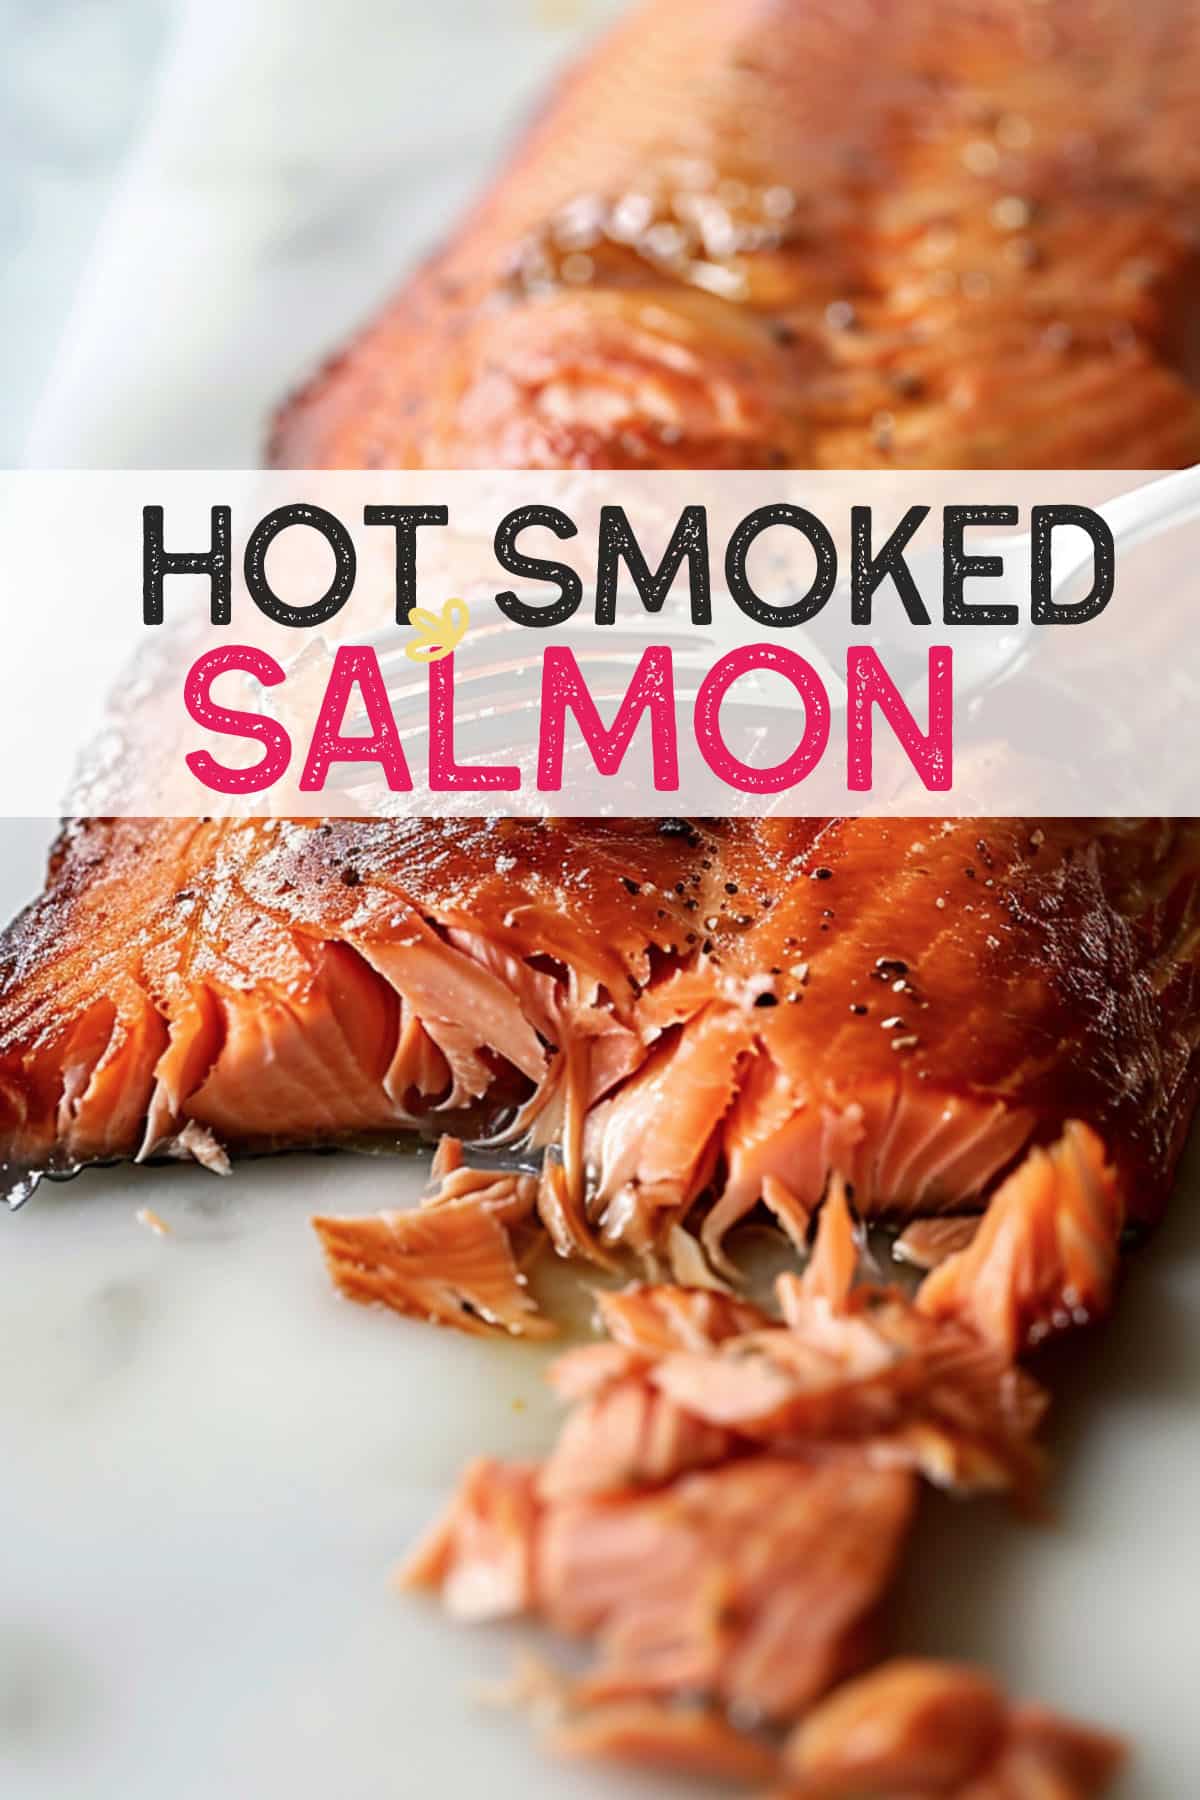 Sliced hot-smoked salmon with a flaky texture and vibrant orange color